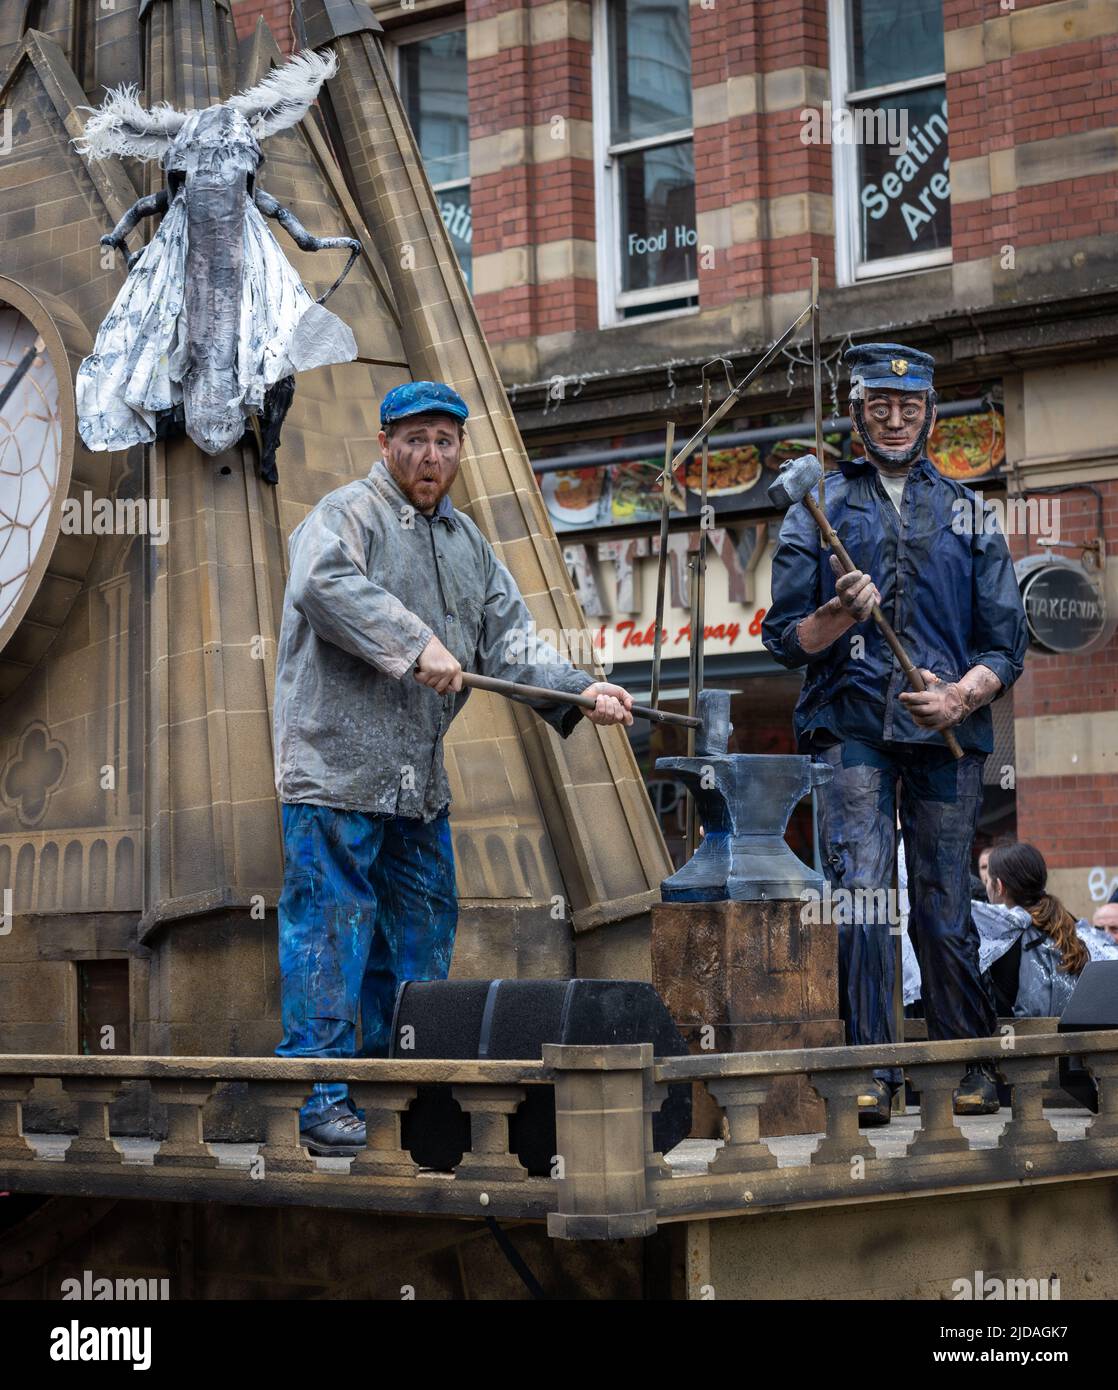 Manchester Day Parade, 19 June 2022: Worker hammering on an anvil Stock Photo